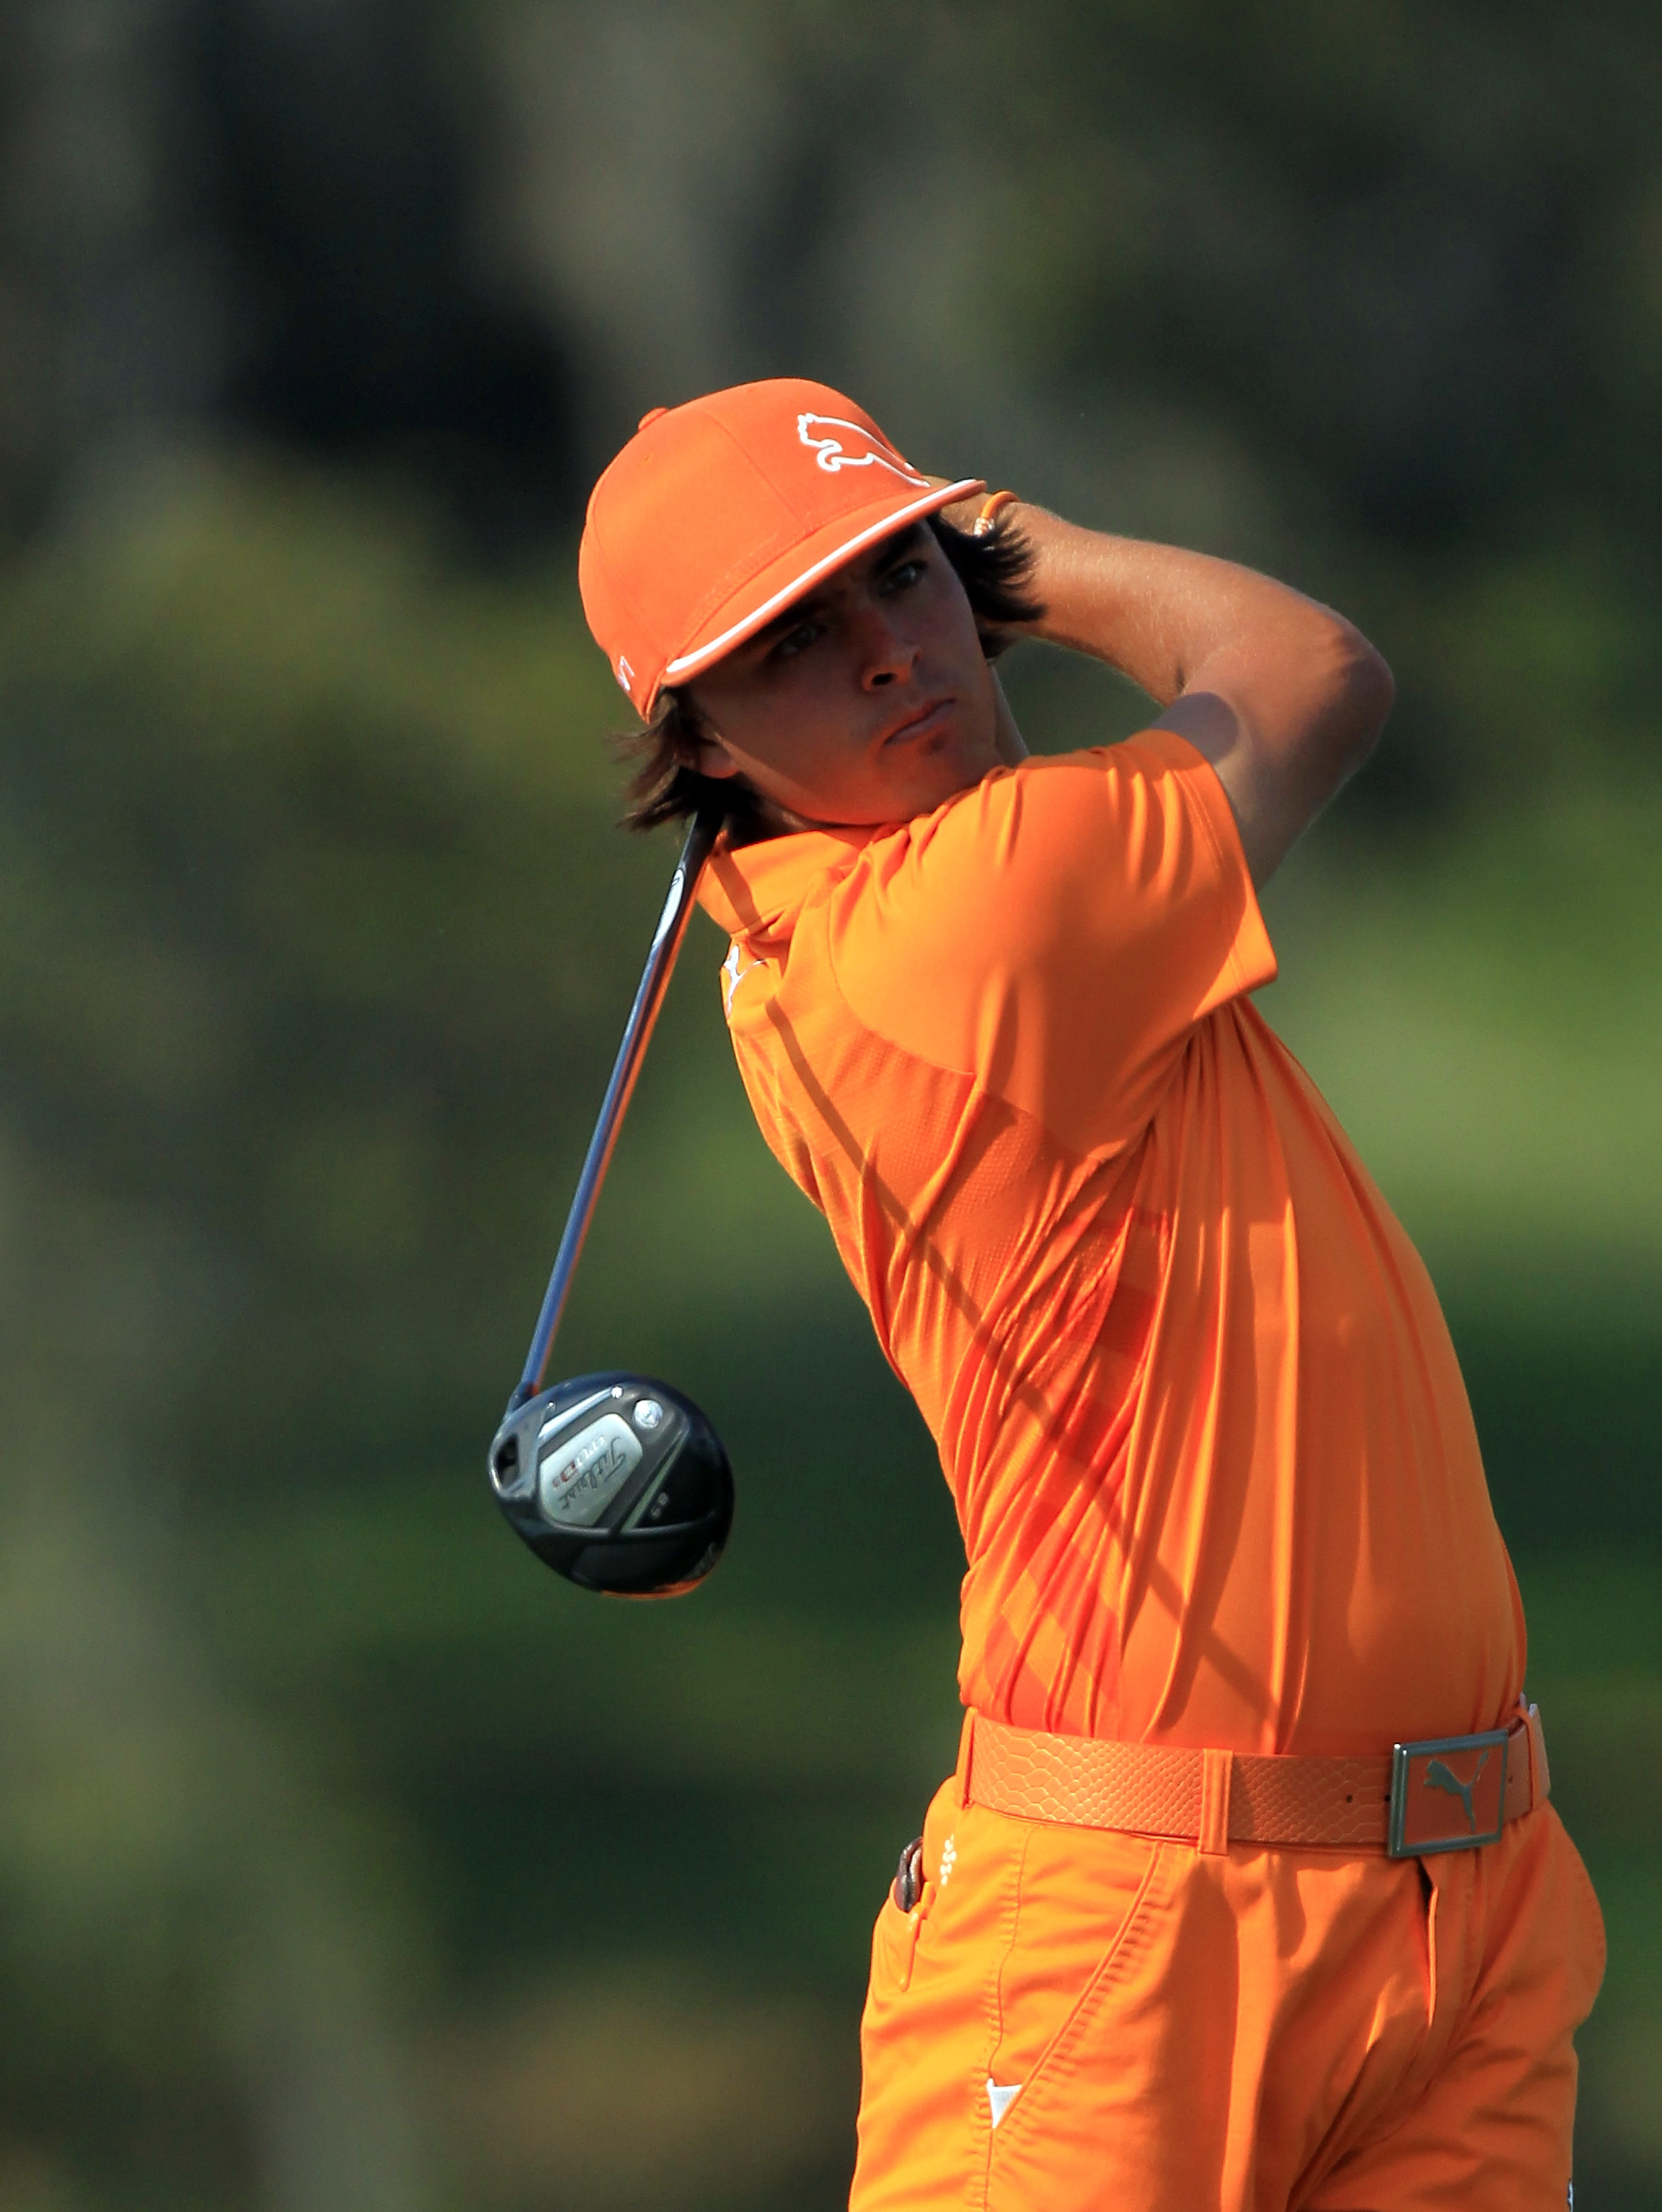 ORLANDO, FL - MARCH 27:  Rickie Fowler of the USA plays his tee shot on the 16th hole during the final round of the 2011 Arnold Palmer Invitational presented by Mastercard at the Bay Hill Lodge and Country Club on March 27, 2011 in Orlando, Florida.  (Pho